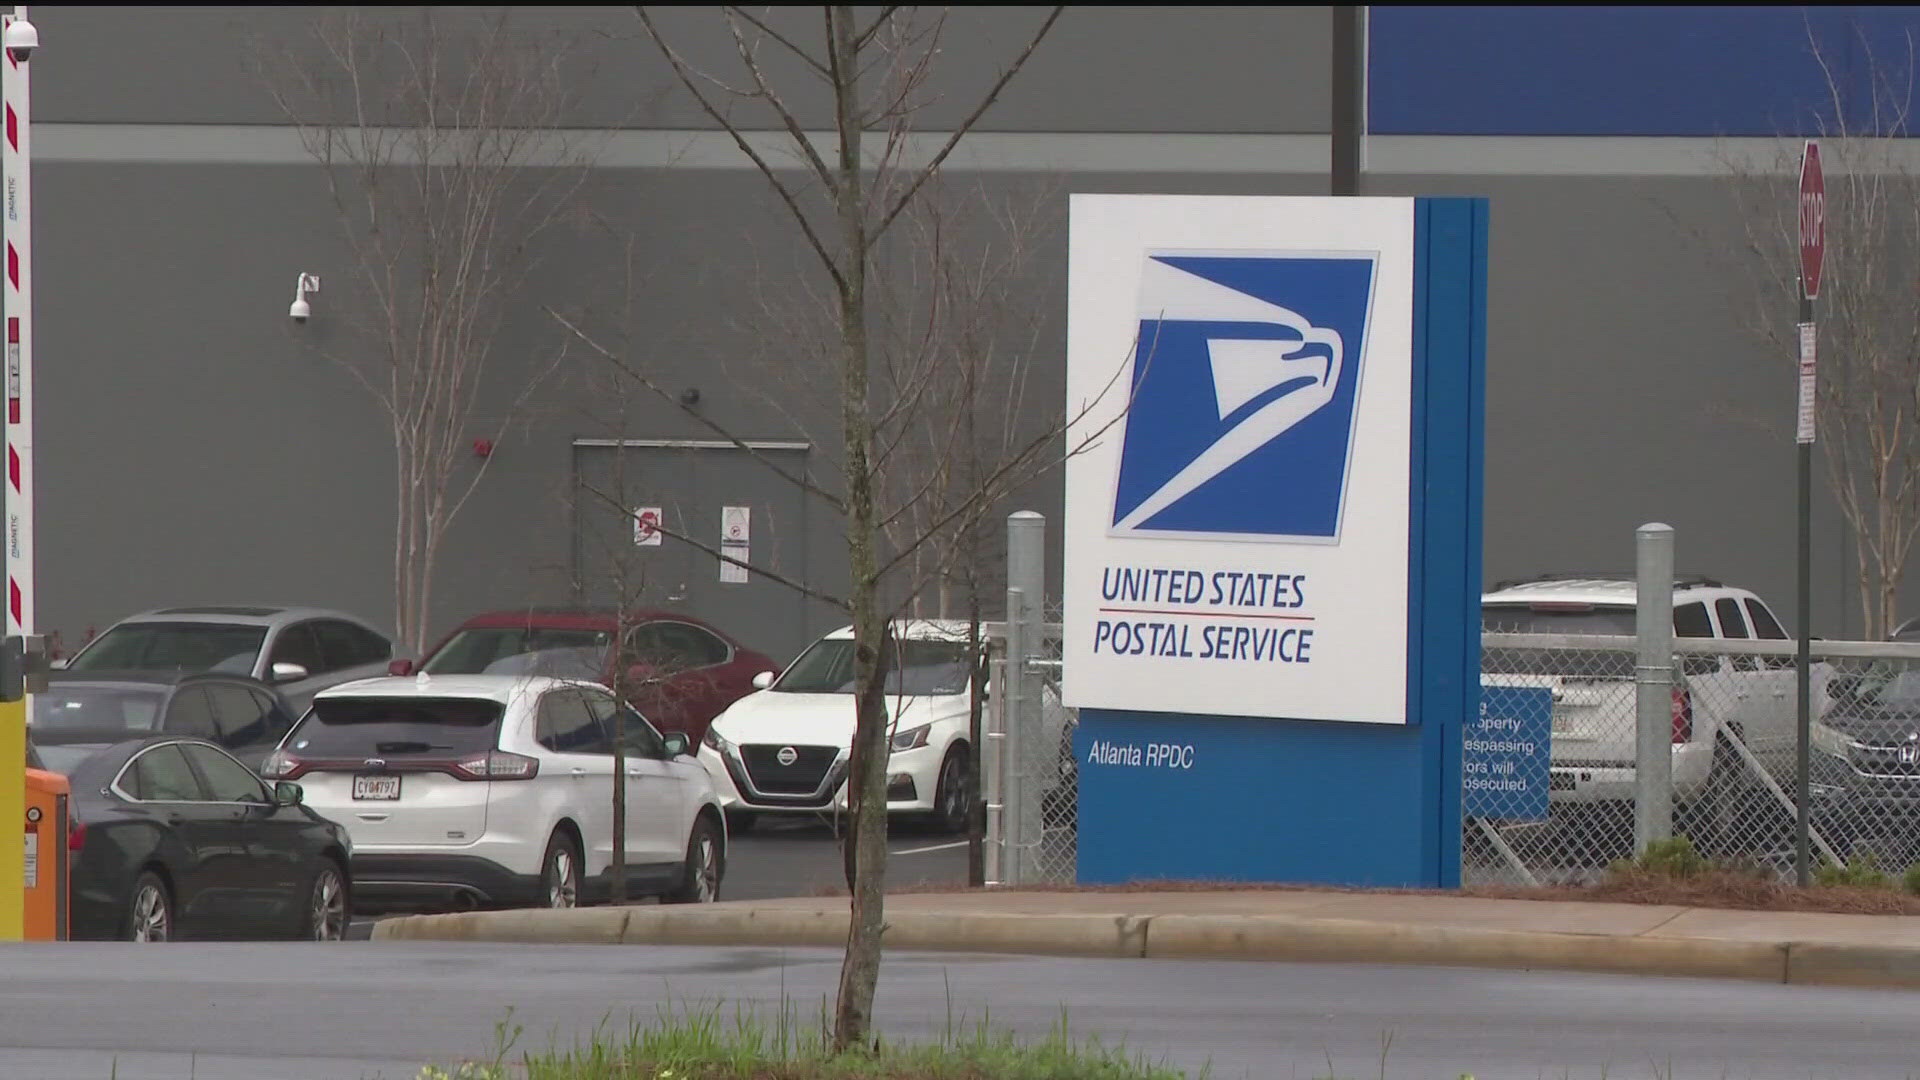 A group of Georgia lawmakers toured the USPS facility on Monday morning and shared hopeful updates.